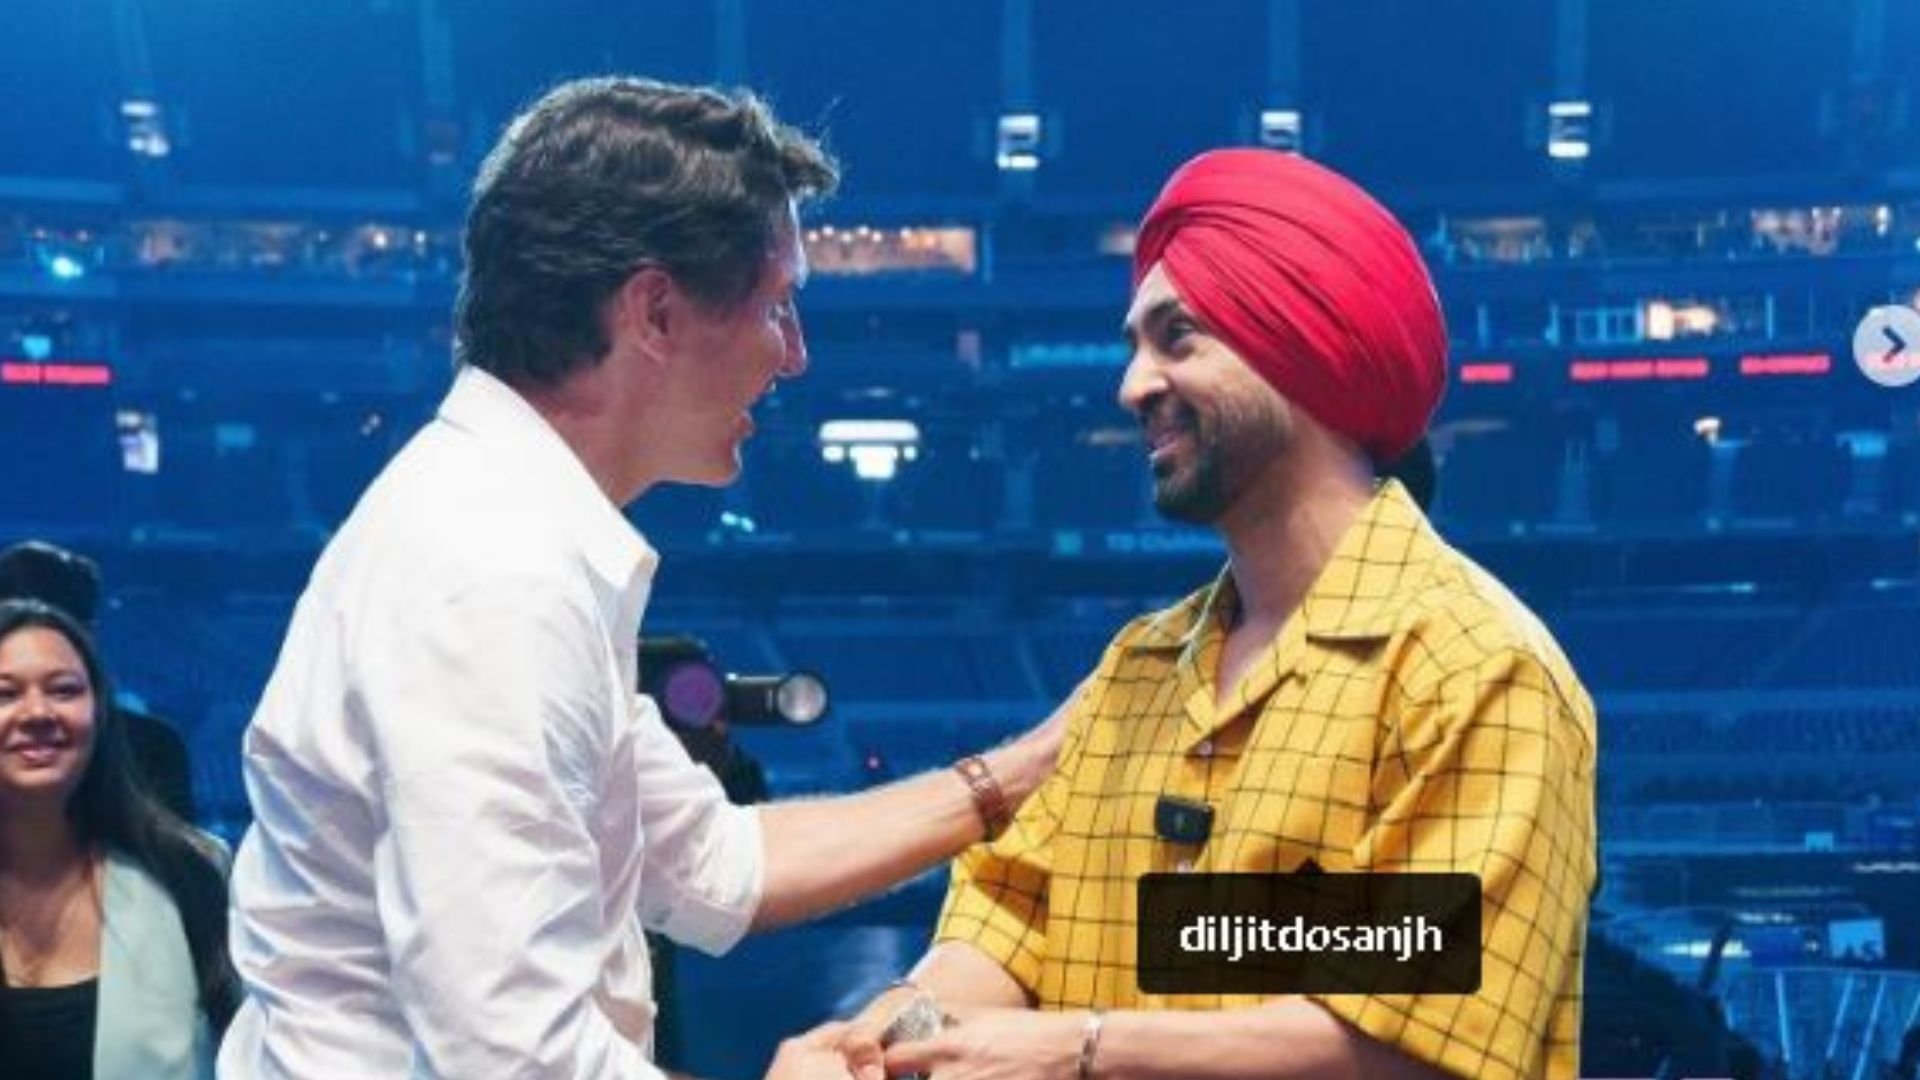 Justin Trudeau Surprises Diljit Dosanjh at Sold-Out Canada Concert